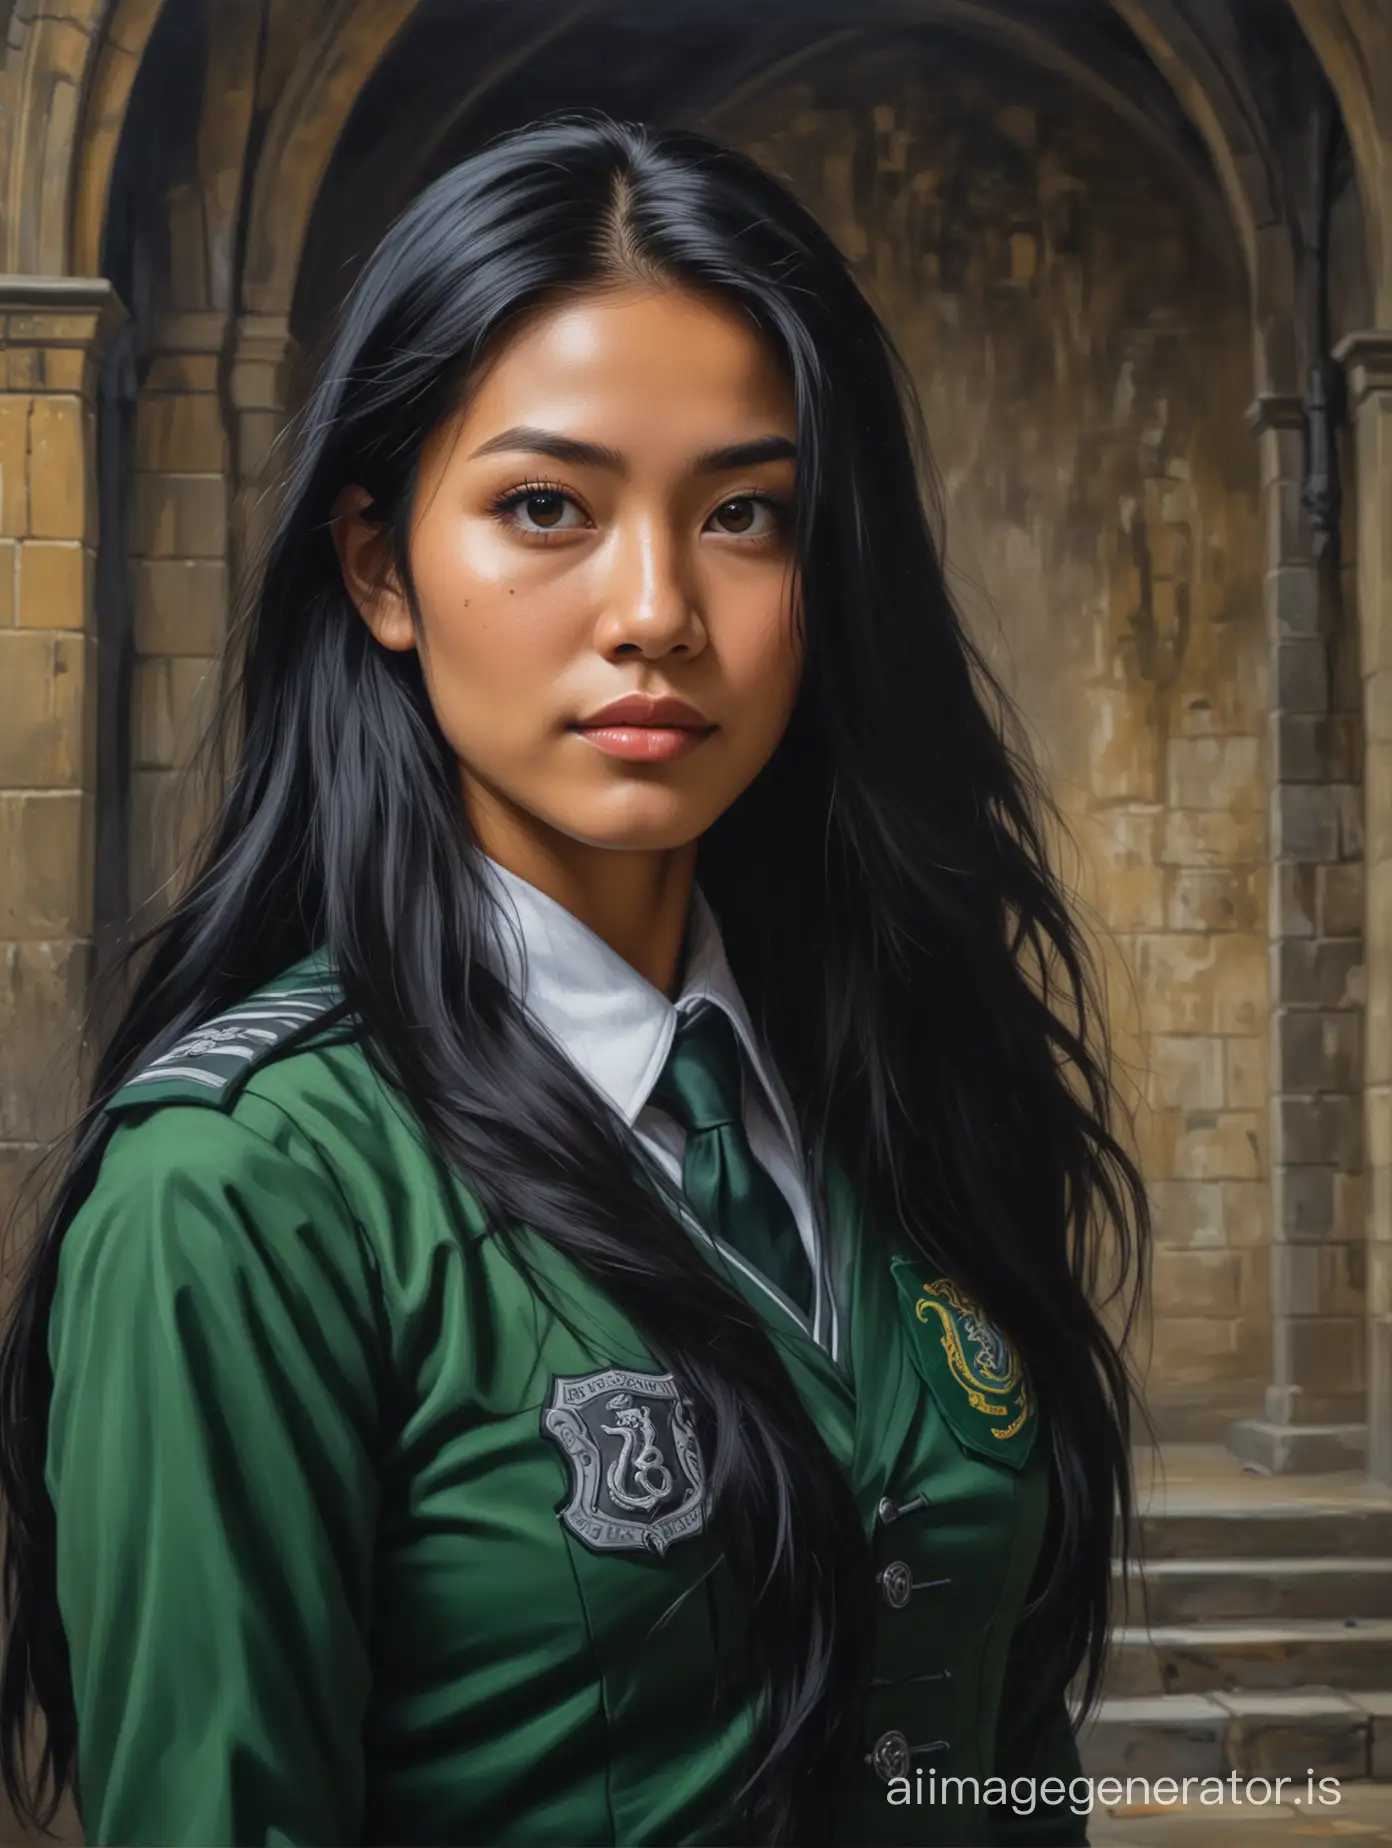 Oil painting of a young beautiful tanned Vietnamese woman with long black hair and small breasts in a Slytherin uniform at Hogwarts